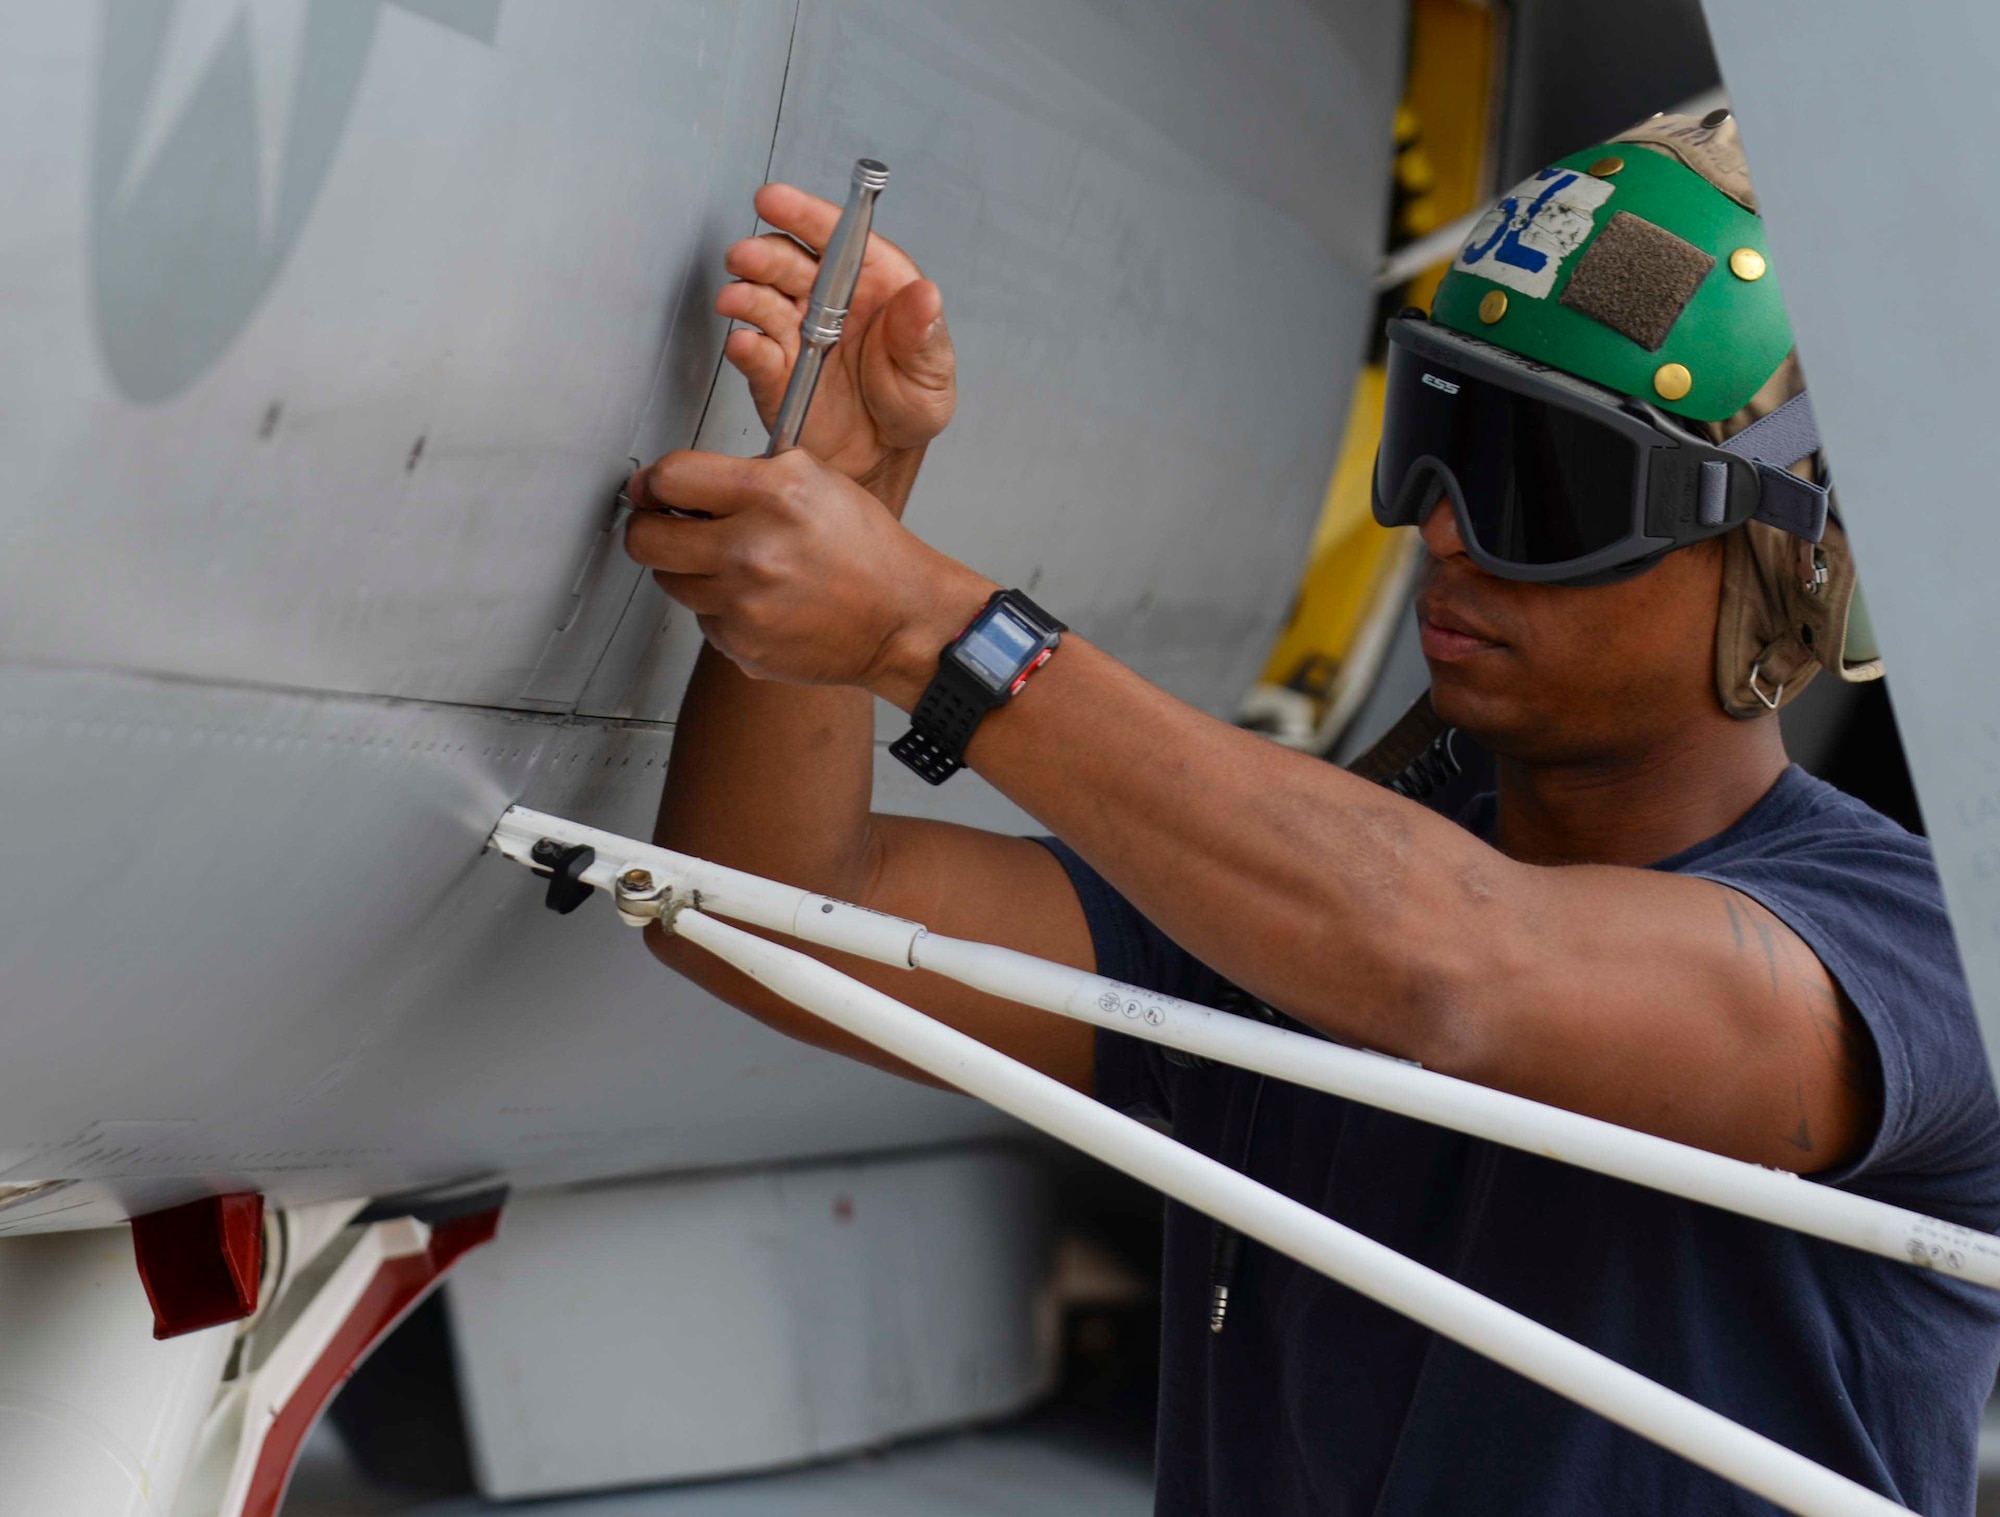 Navy Aviation Structural Mechanic (Safety Equipmentman) Third Class J.P. Sharp, assigned to Electronic Attack Squadron (VAQ) 129, secures panels for a preflight check during training at Ellsworth Air Force Base, S.D., July 15, 2016. Approximately 110 Sailors participated in the training, performing tasks such as turnarounds which require personnel to check for gear damage as well as prepare the jet for another take-off. (U.S. Air Force photo by Airman 1st Class Sadie Colbert/Released)